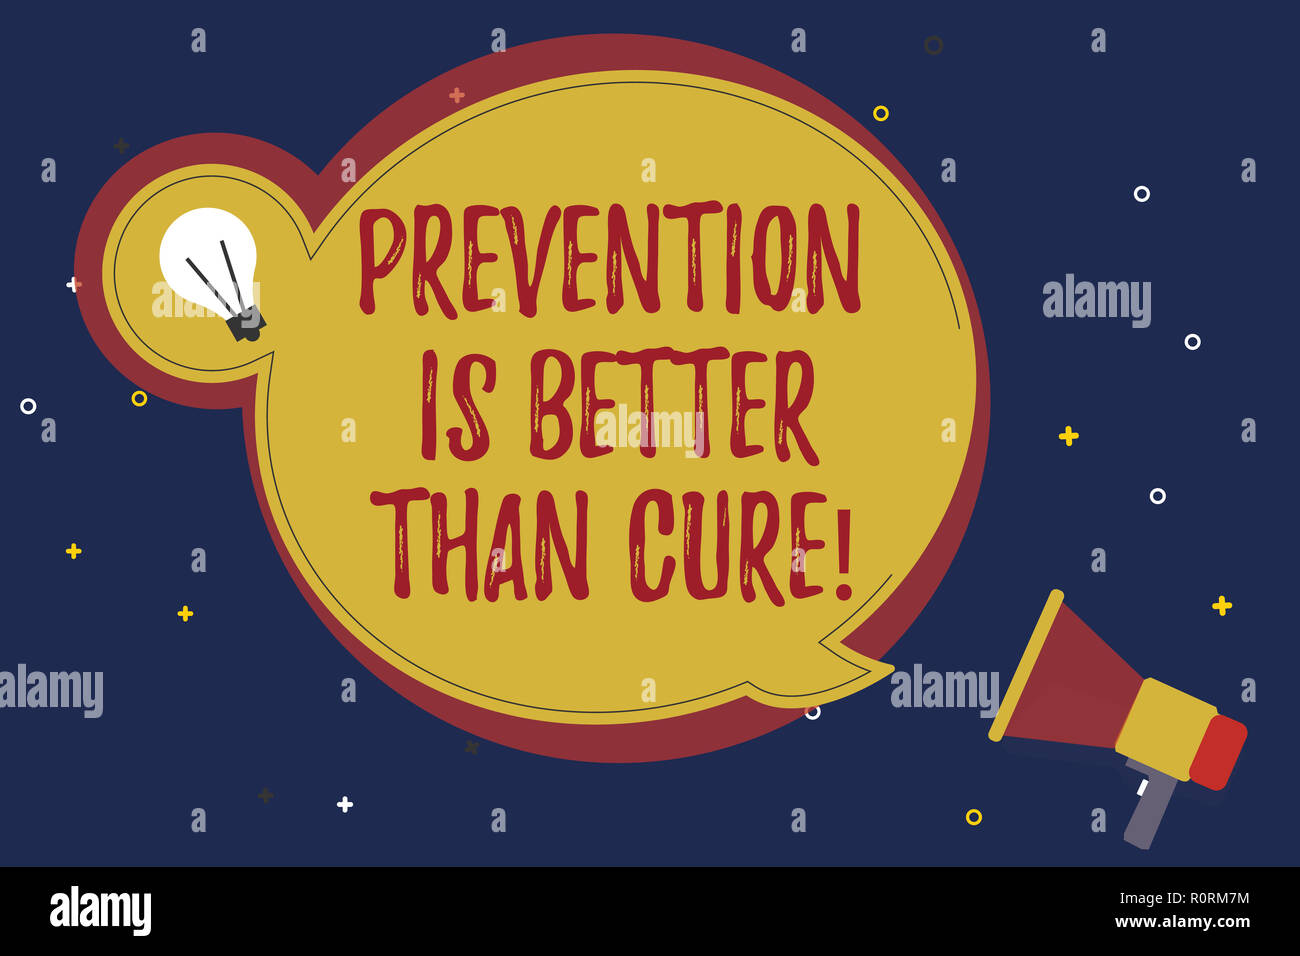 Prevention is better than cure essay